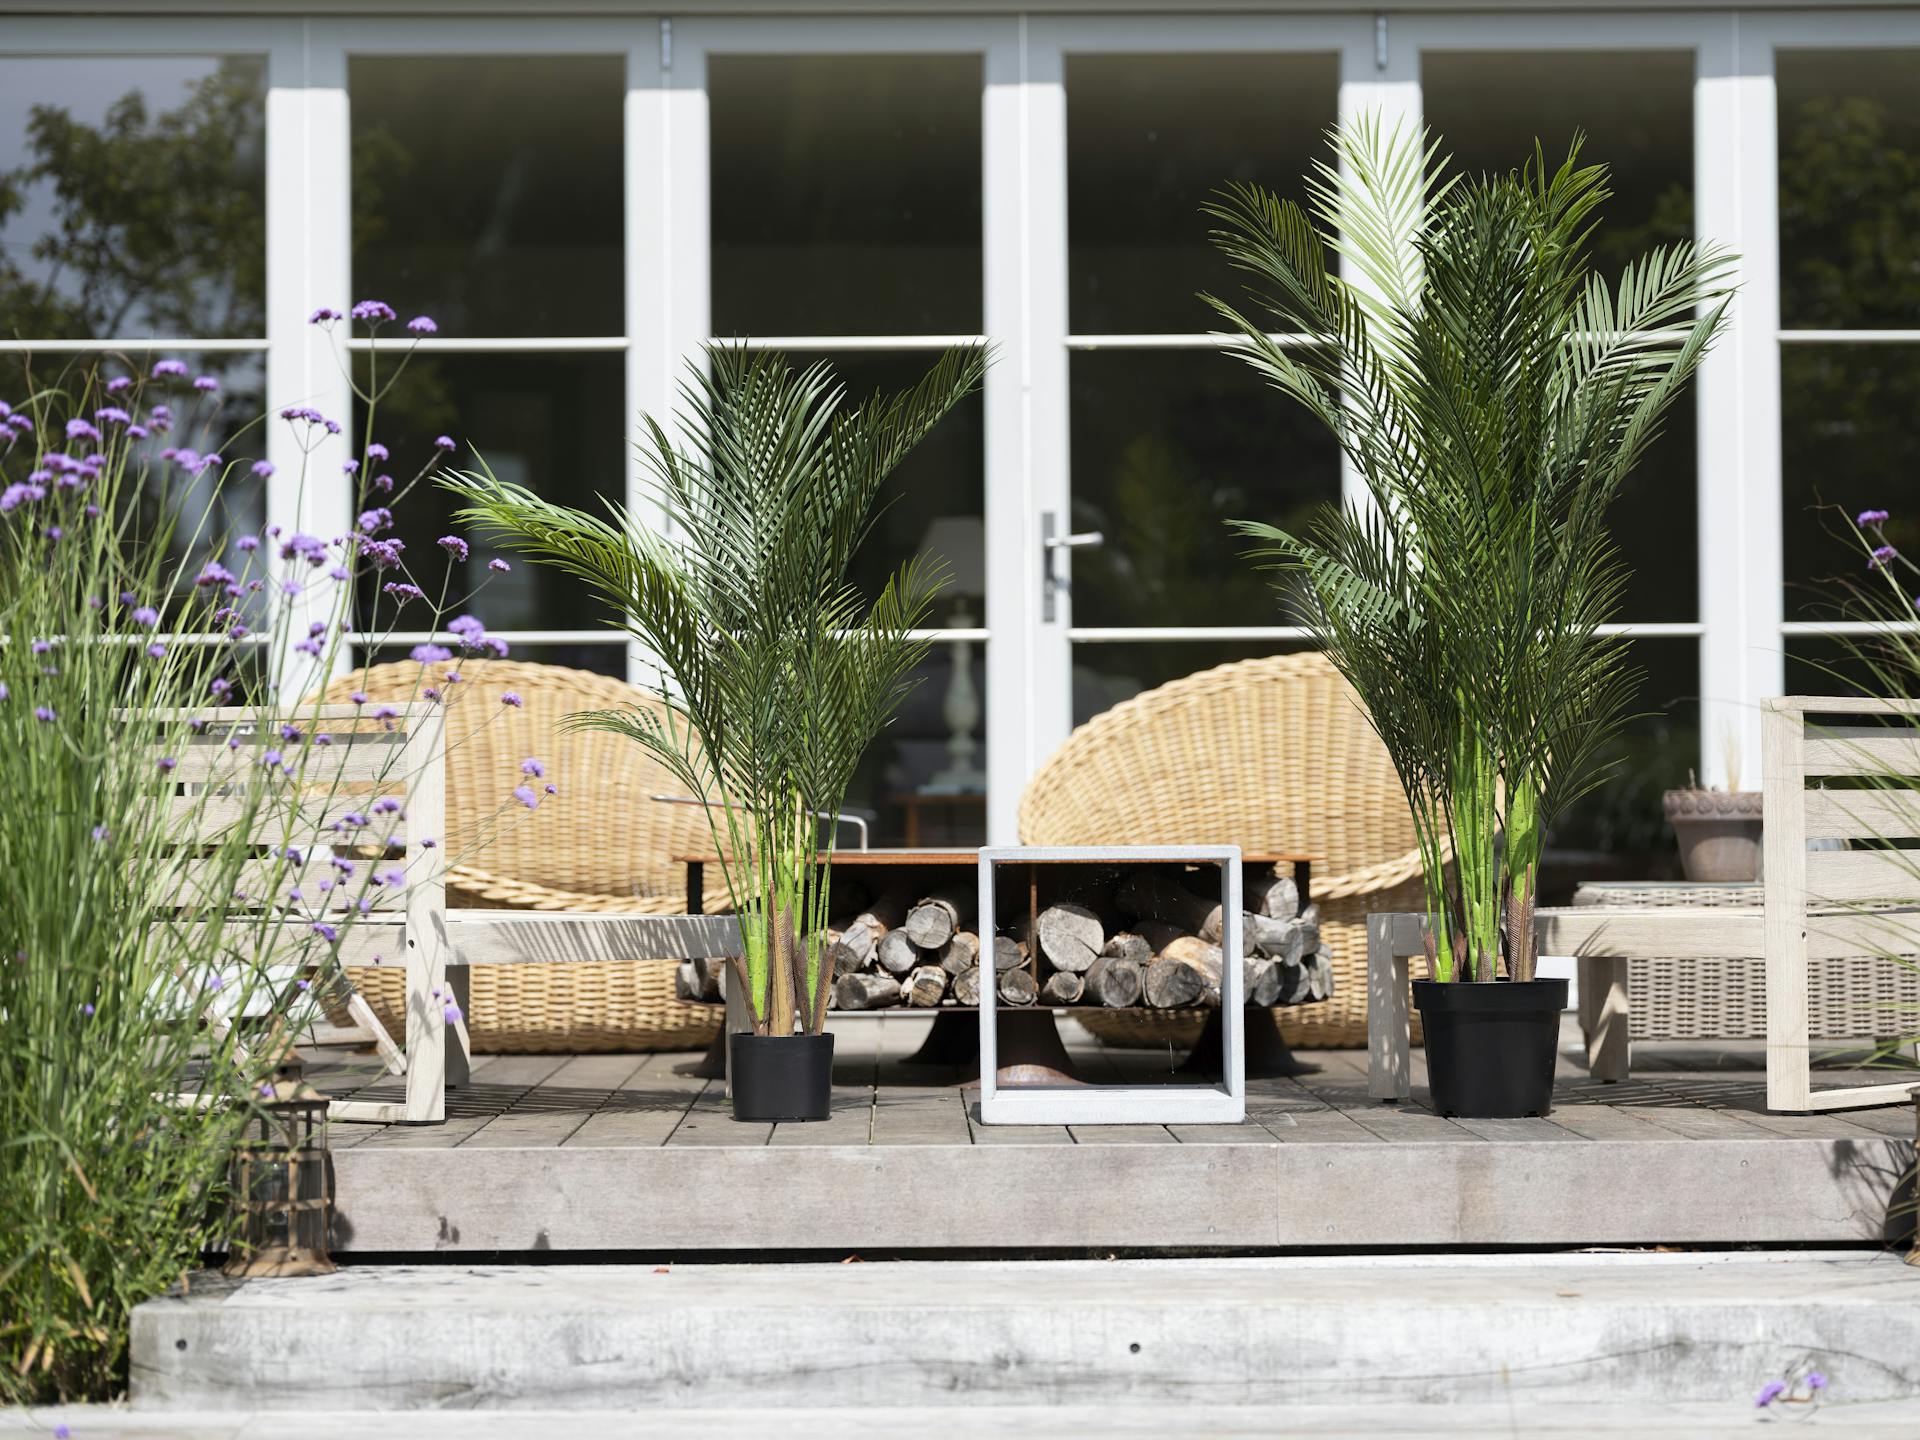 120cm artificial areca palm tree on decking outside